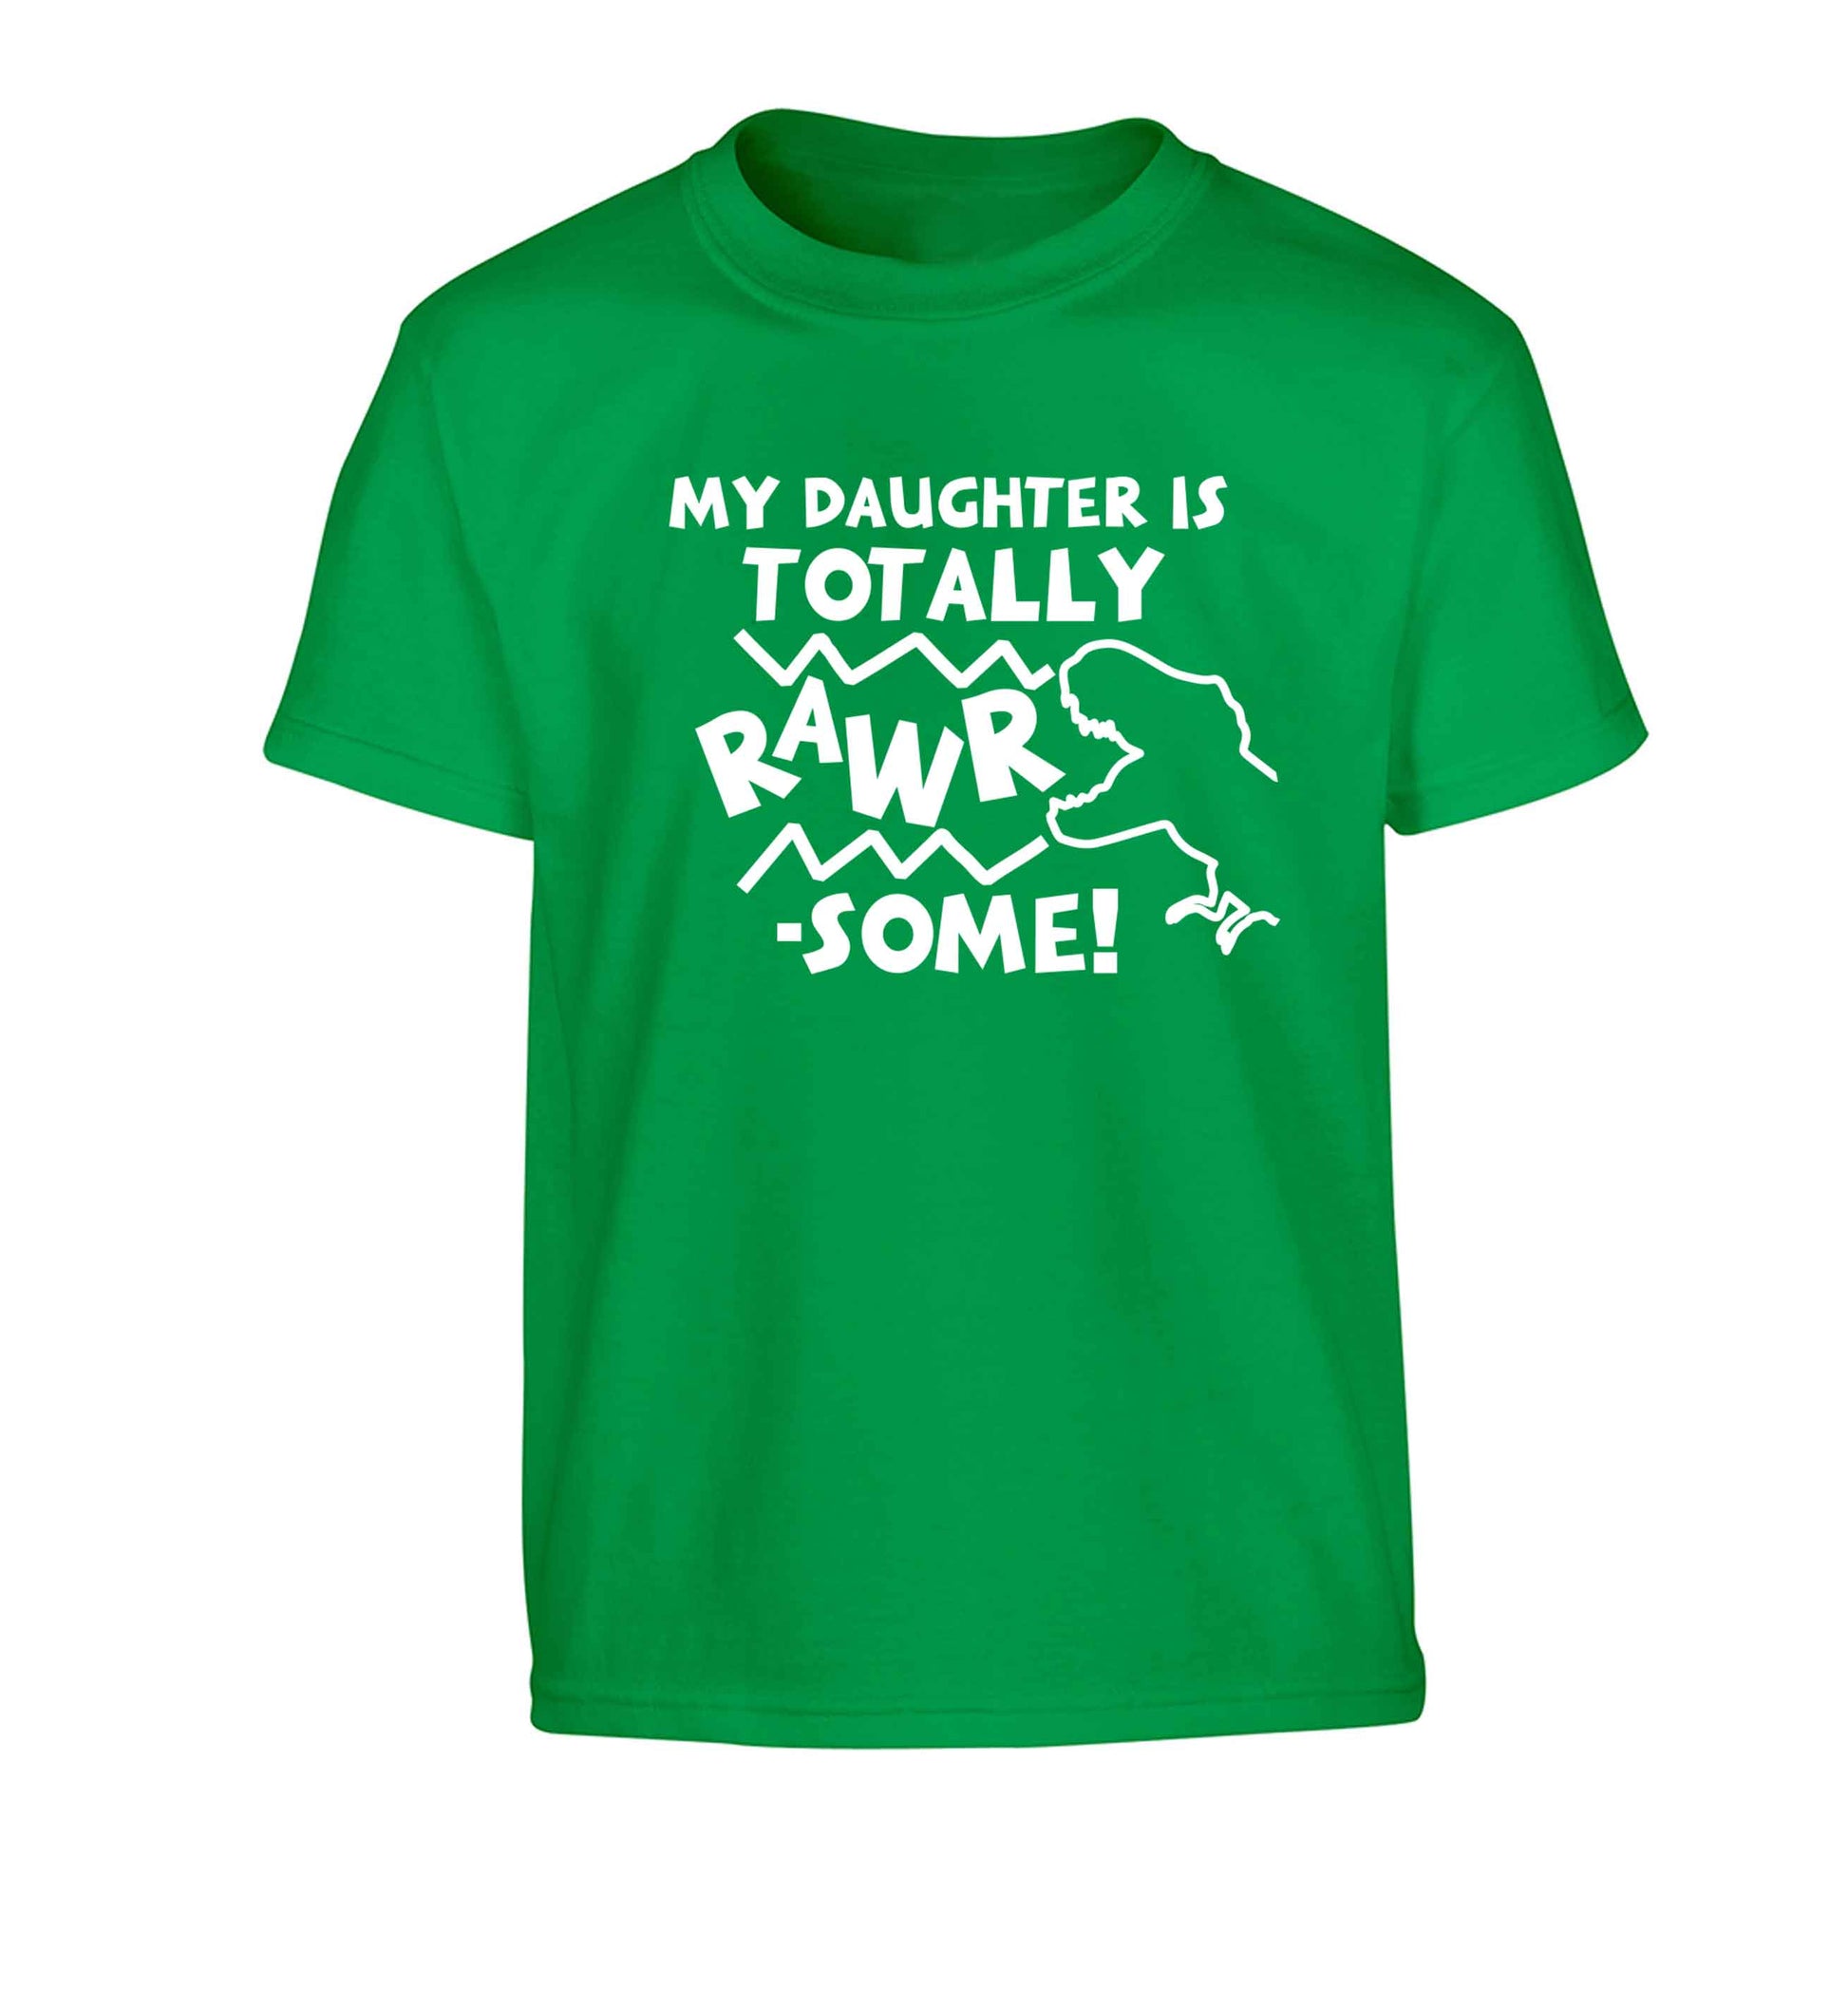 My daughter is totally rawrsome Children's green Tshirt 12-13 Years